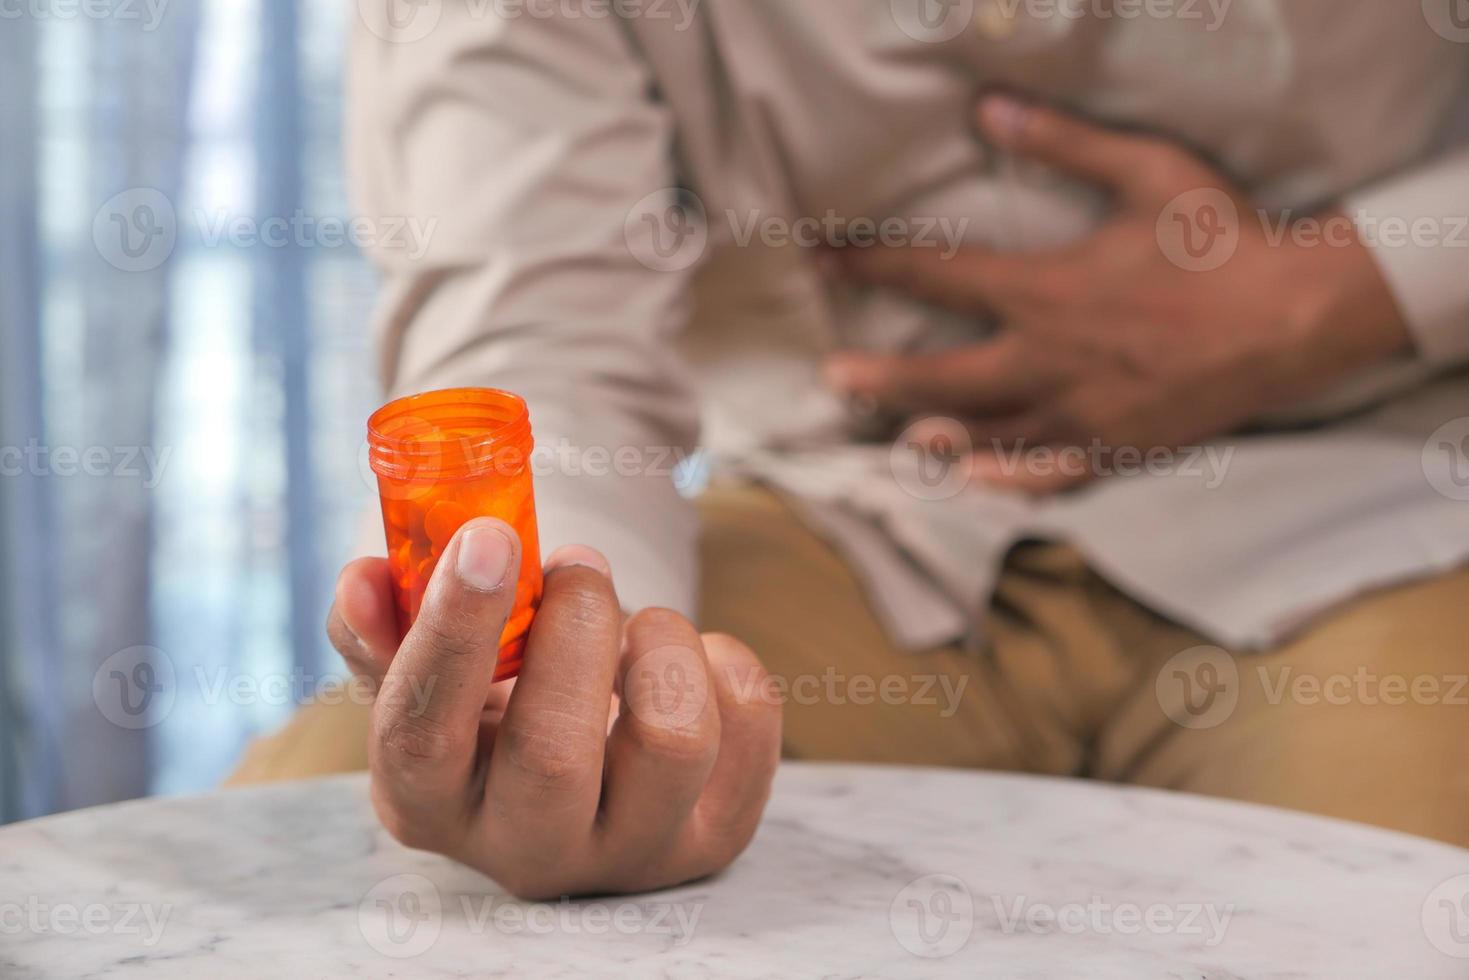 Man with stomach ache holding an orange pill bottle photo